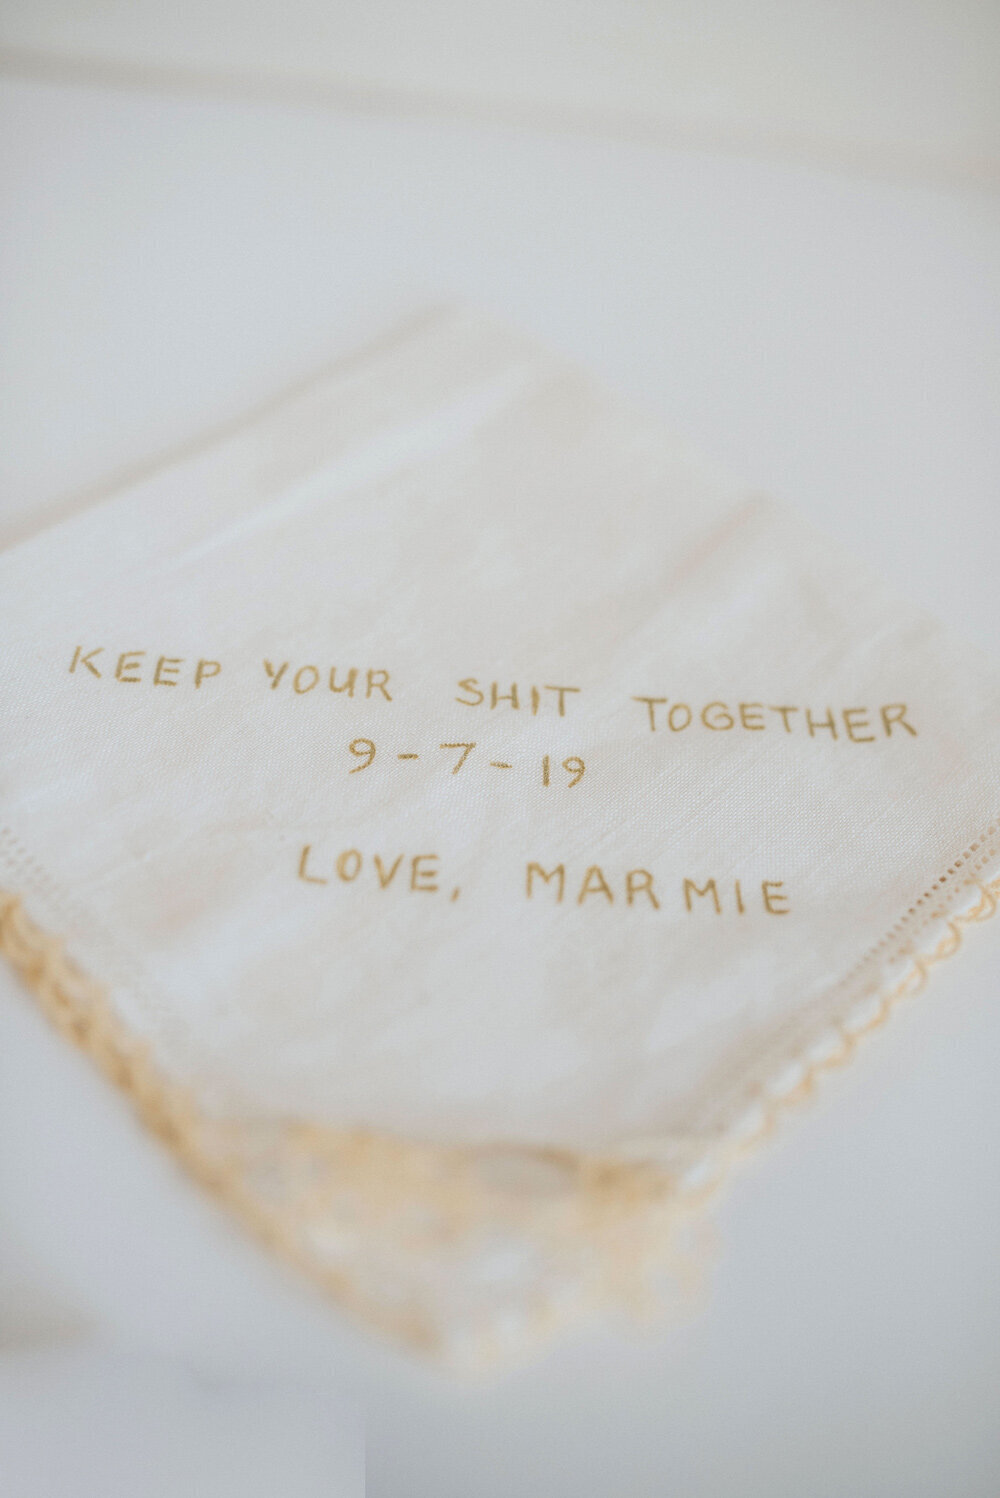 Keep your shit together 9-7-19 Love, Marmie pre-wedding note